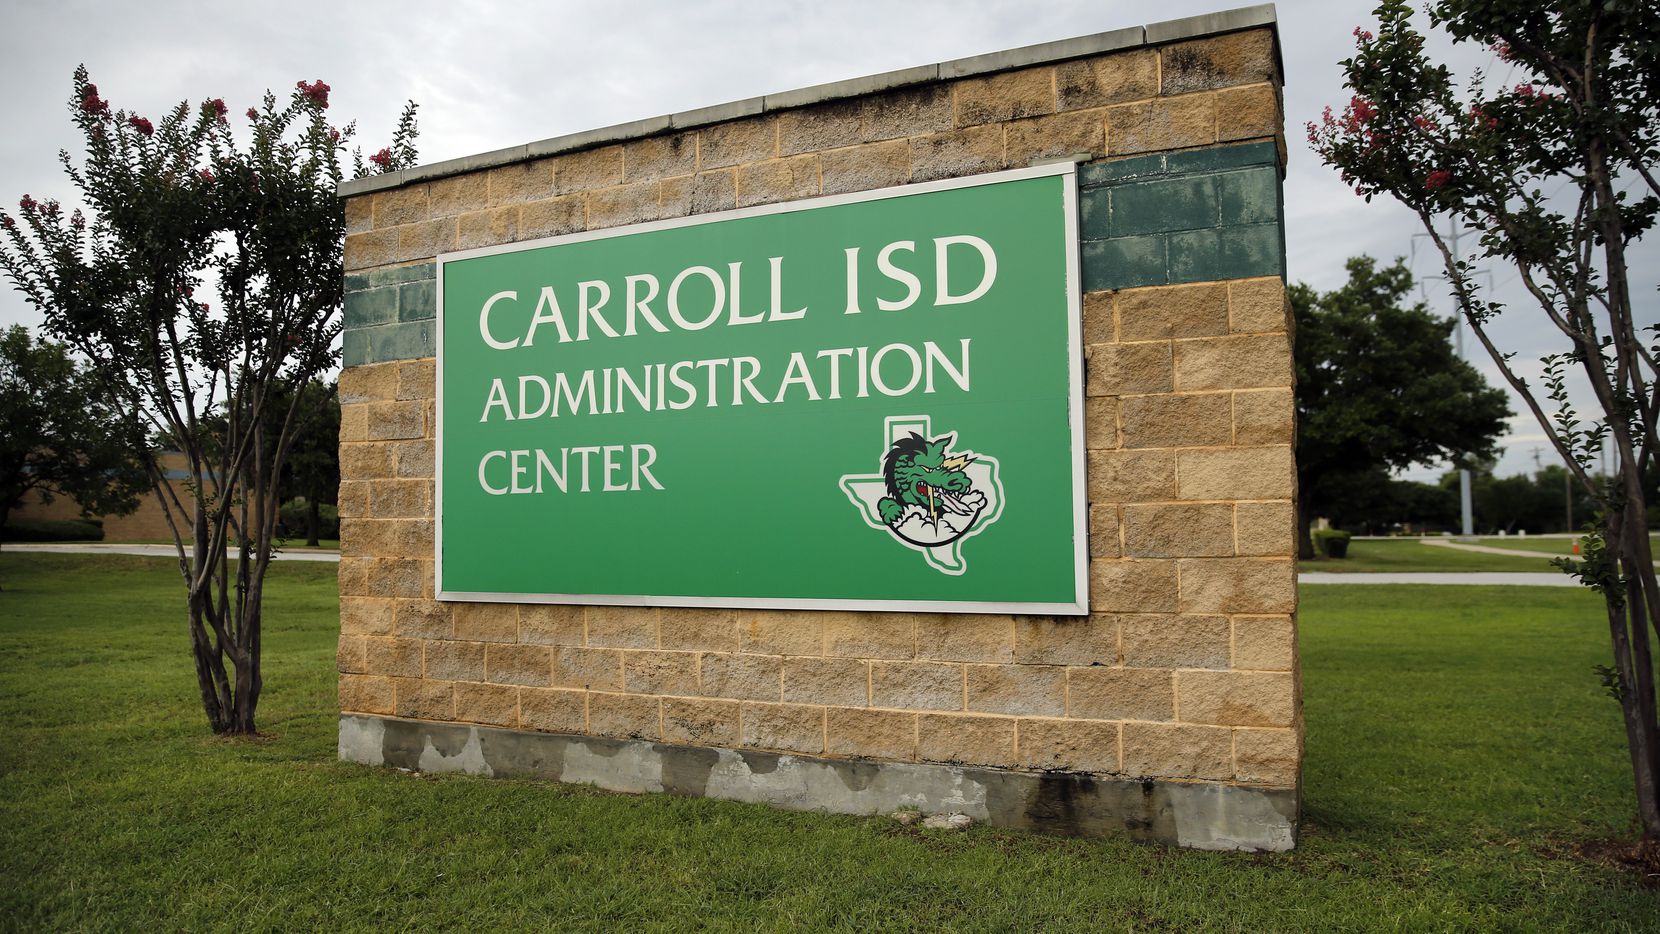 The Carroll ISD Administration Center in Southlake, Texas, Tuesday, June 23, 2020. (Tom Fox/The Dallas Morning News)